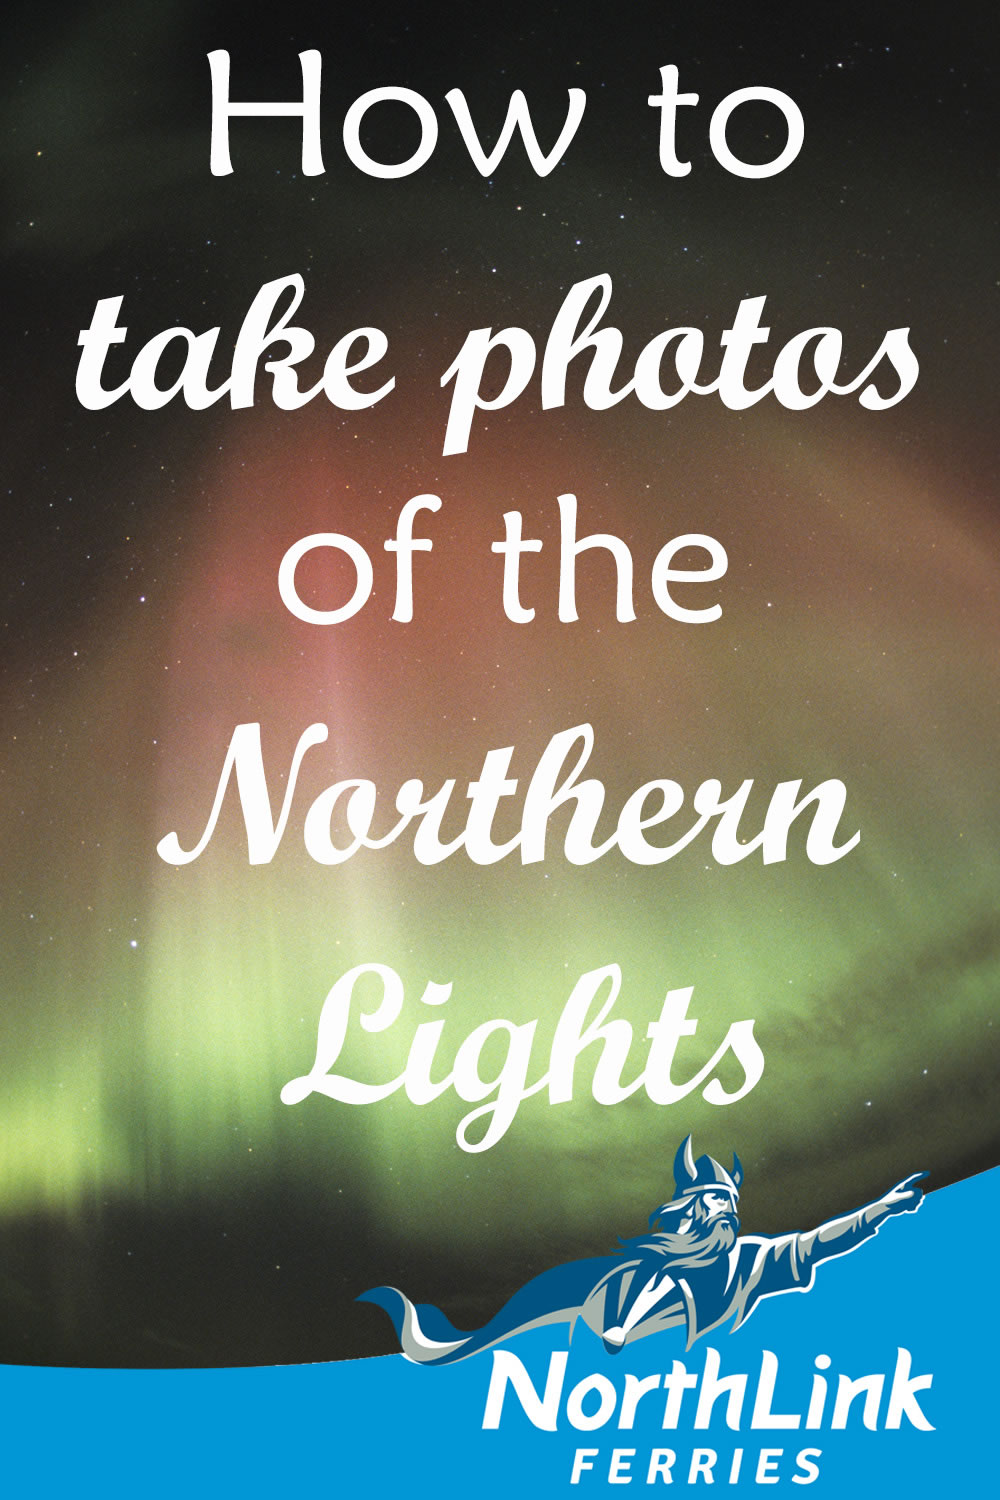 How to take photos of the Northern Lights